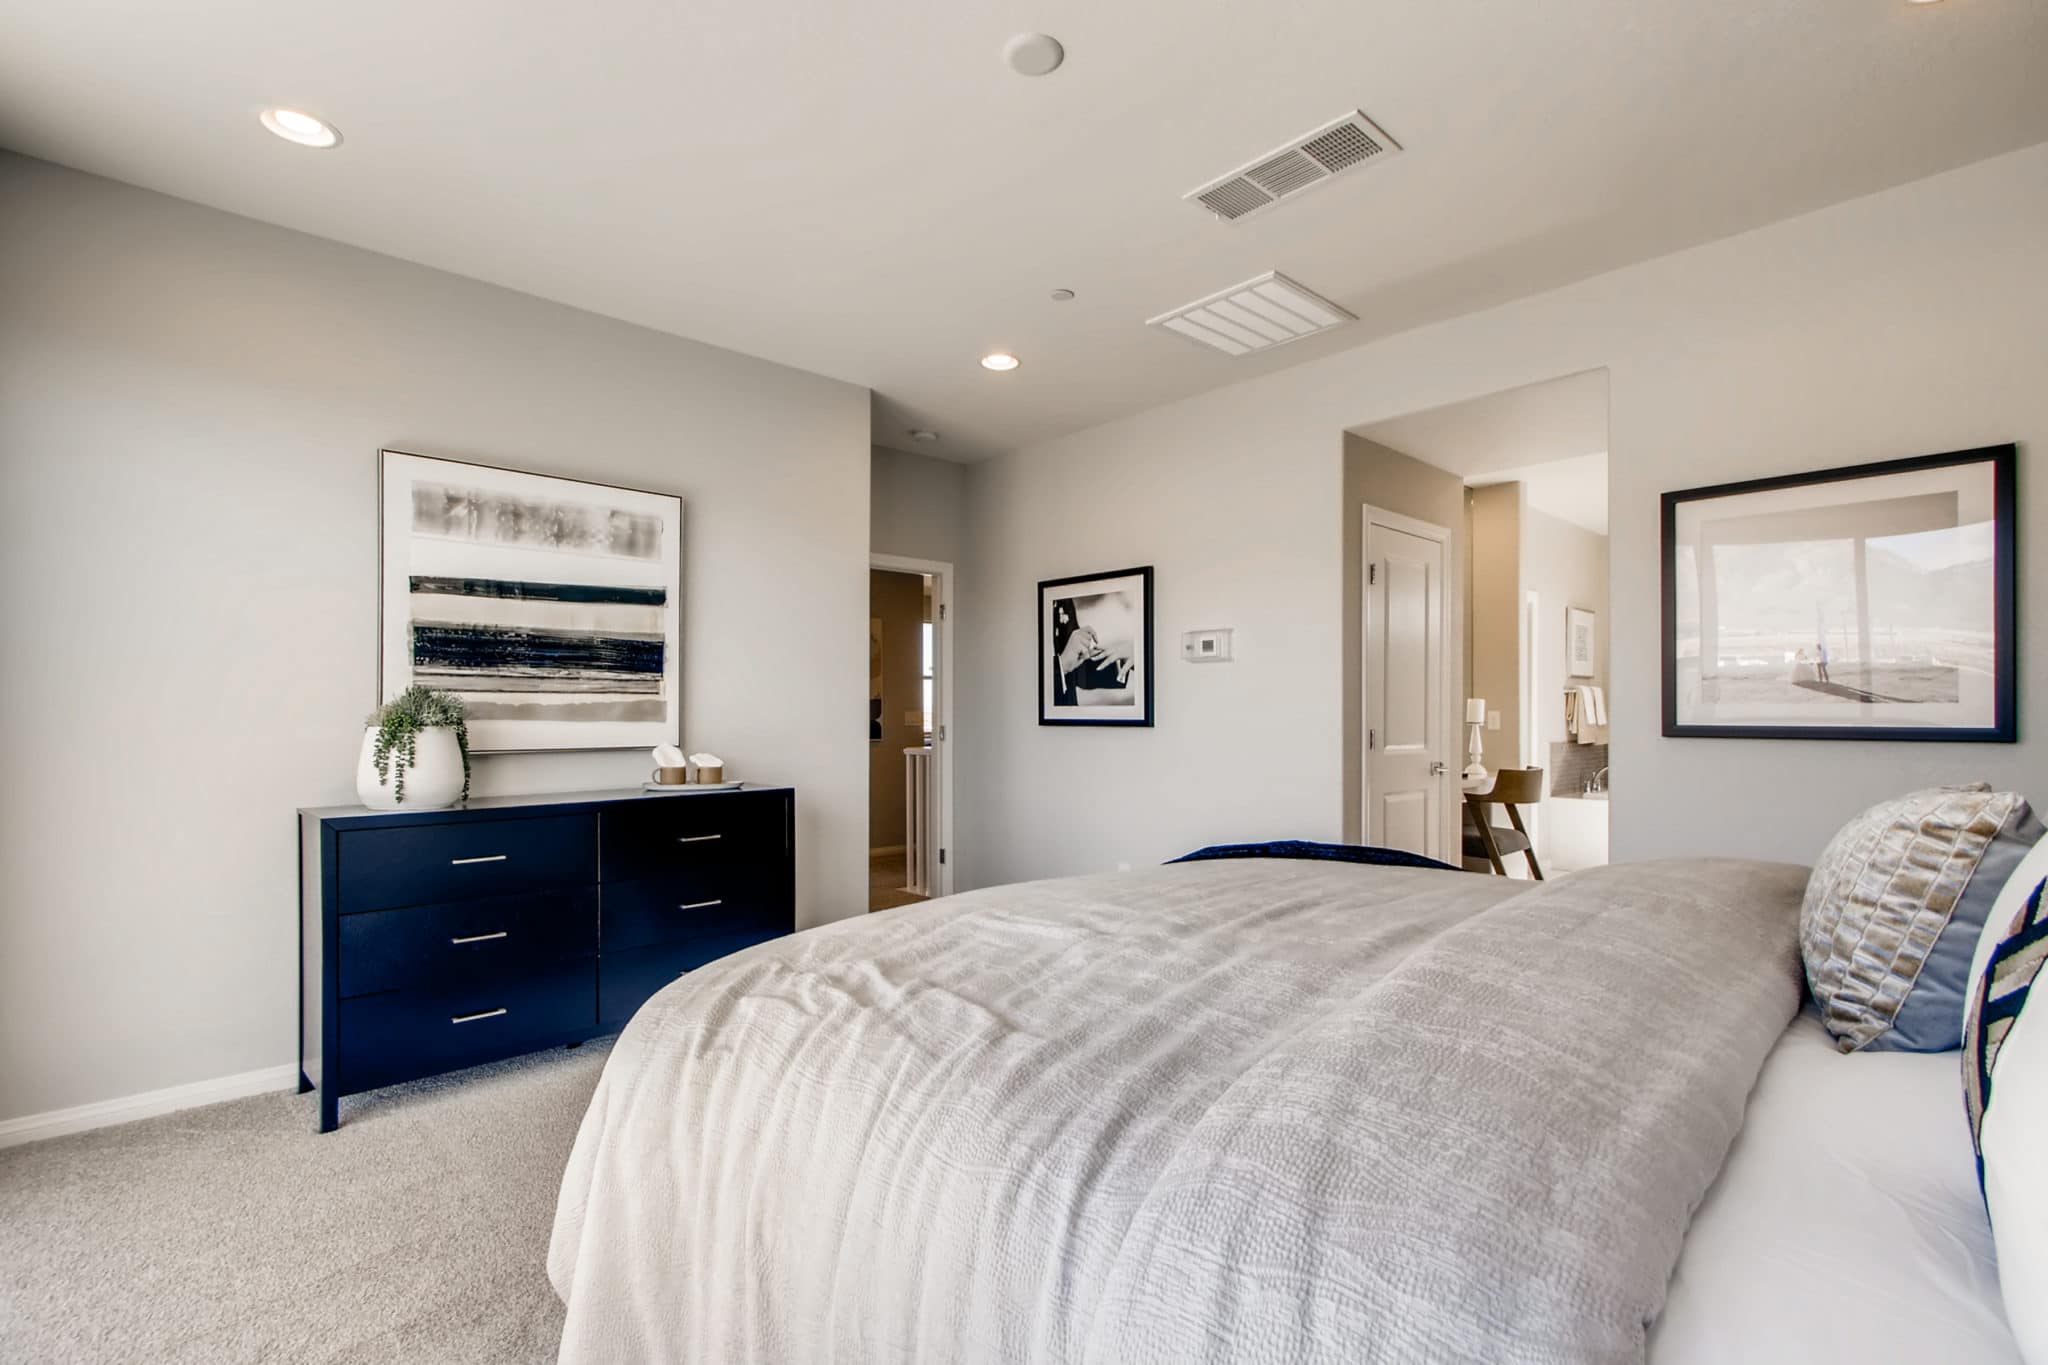 Primary Bedroom of Mojave Plan at Crystal Canyon by Woodside Homes